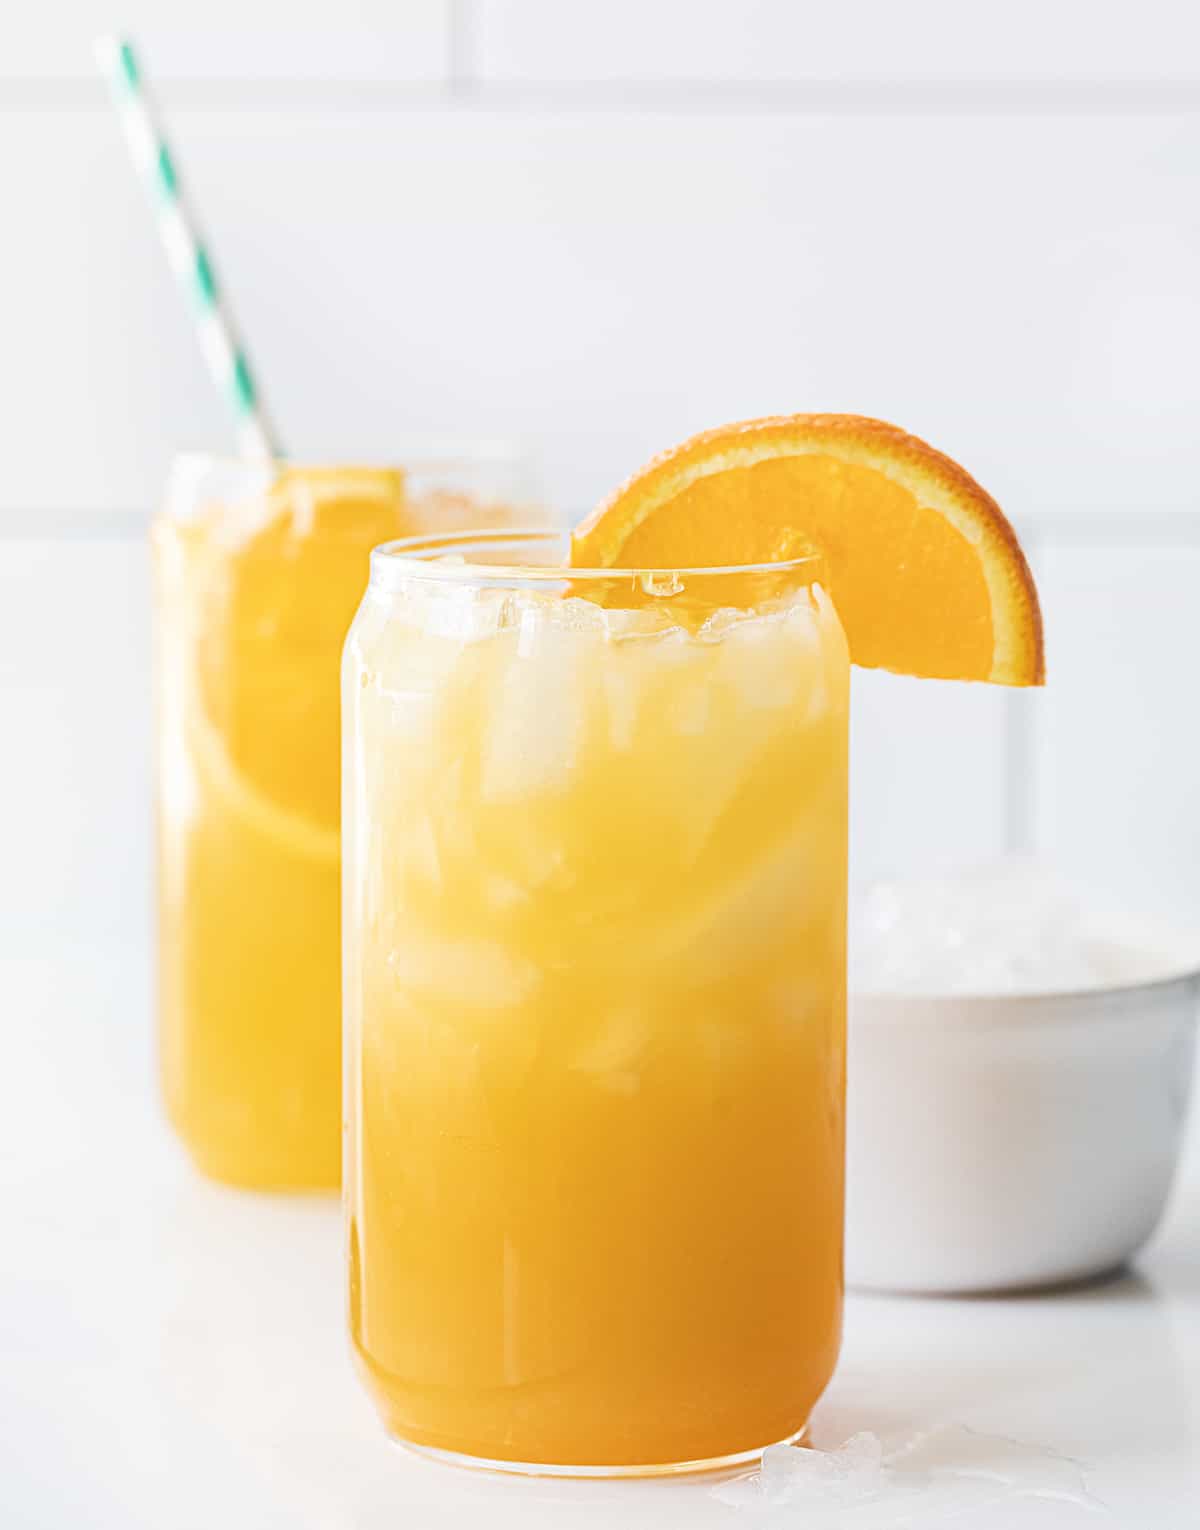 Glasses of Yellow Hammer Slammer with an Orange Garnish on a White Counter.